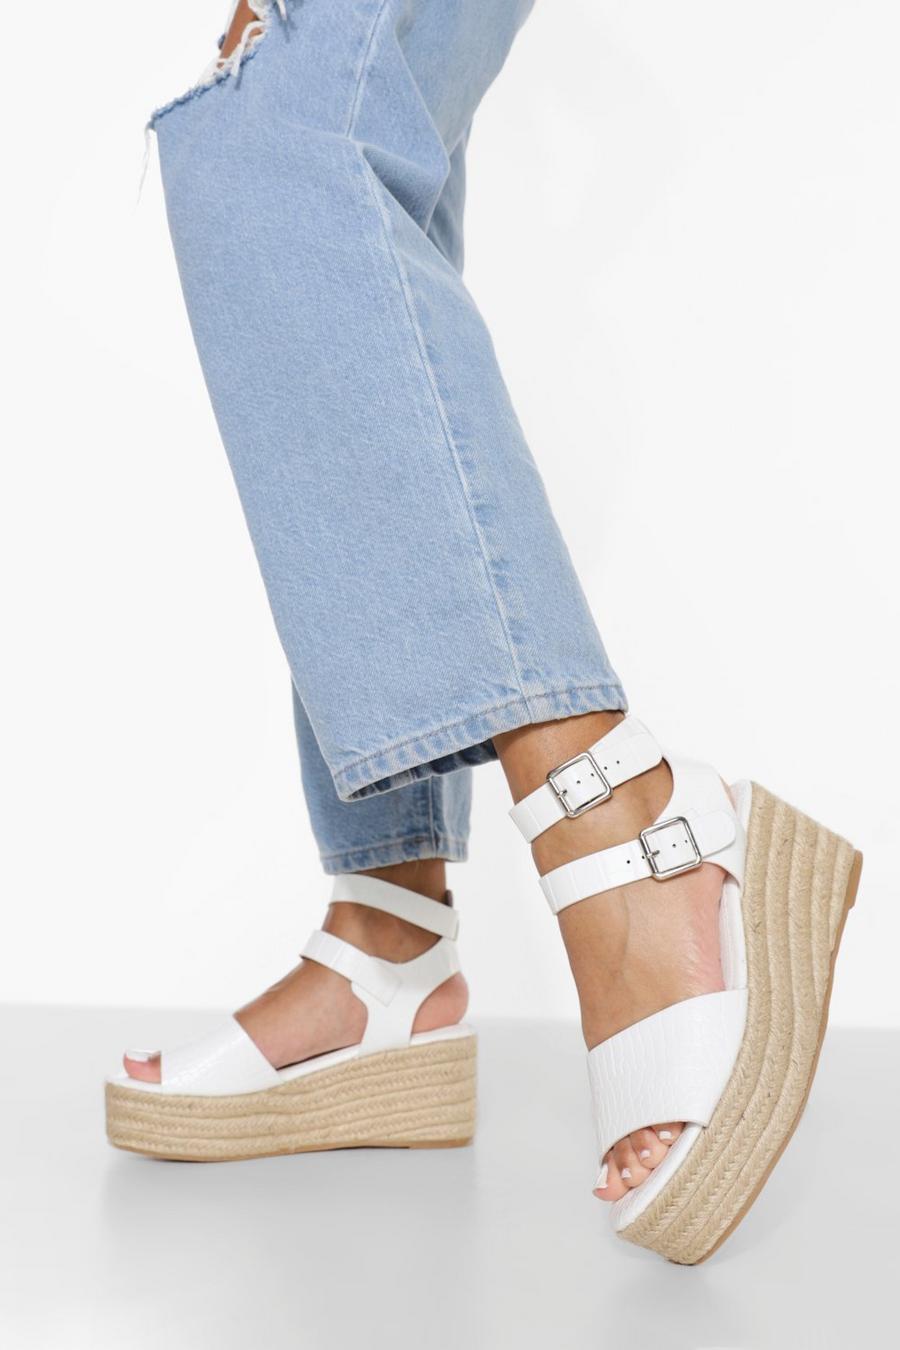 White Croc Double Buckle Wedge